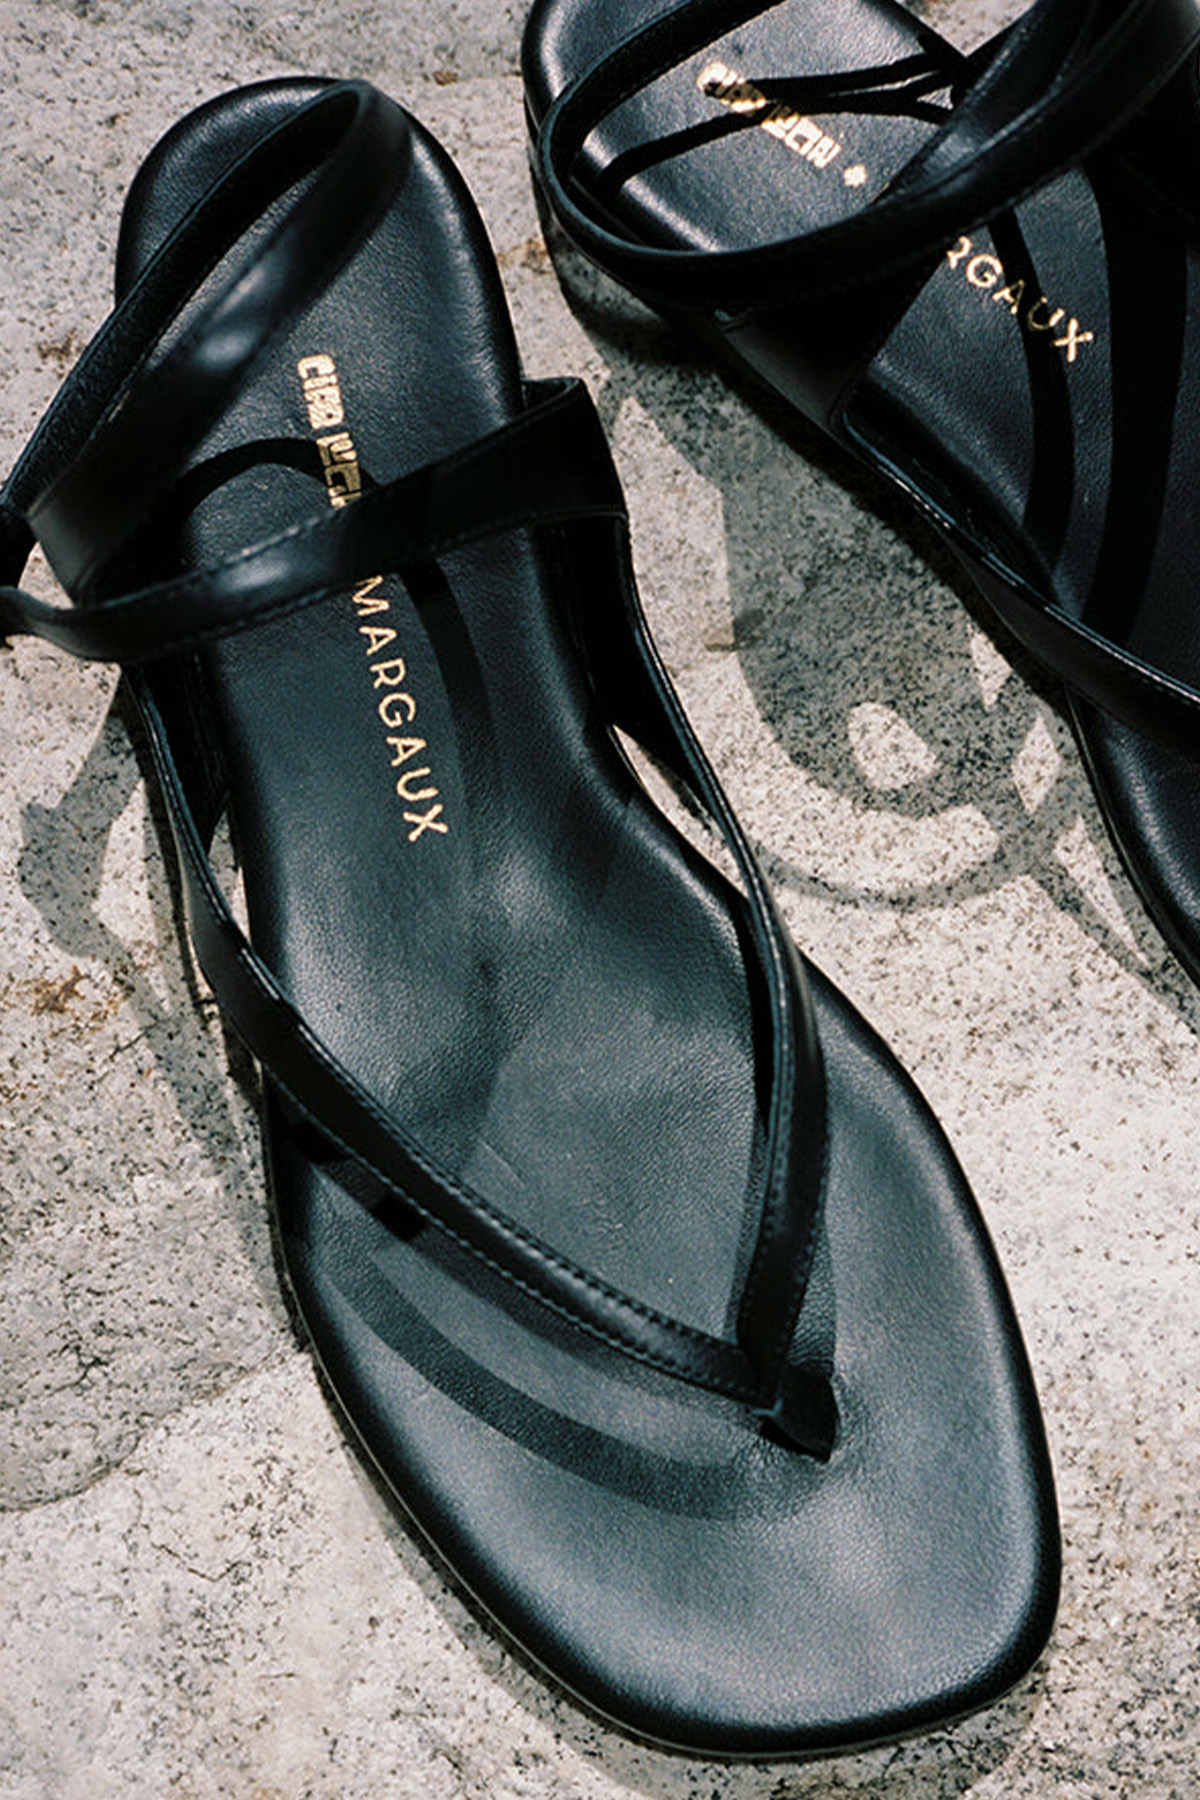 Ciao Lucia x Margaux The Palermo Sandal Black